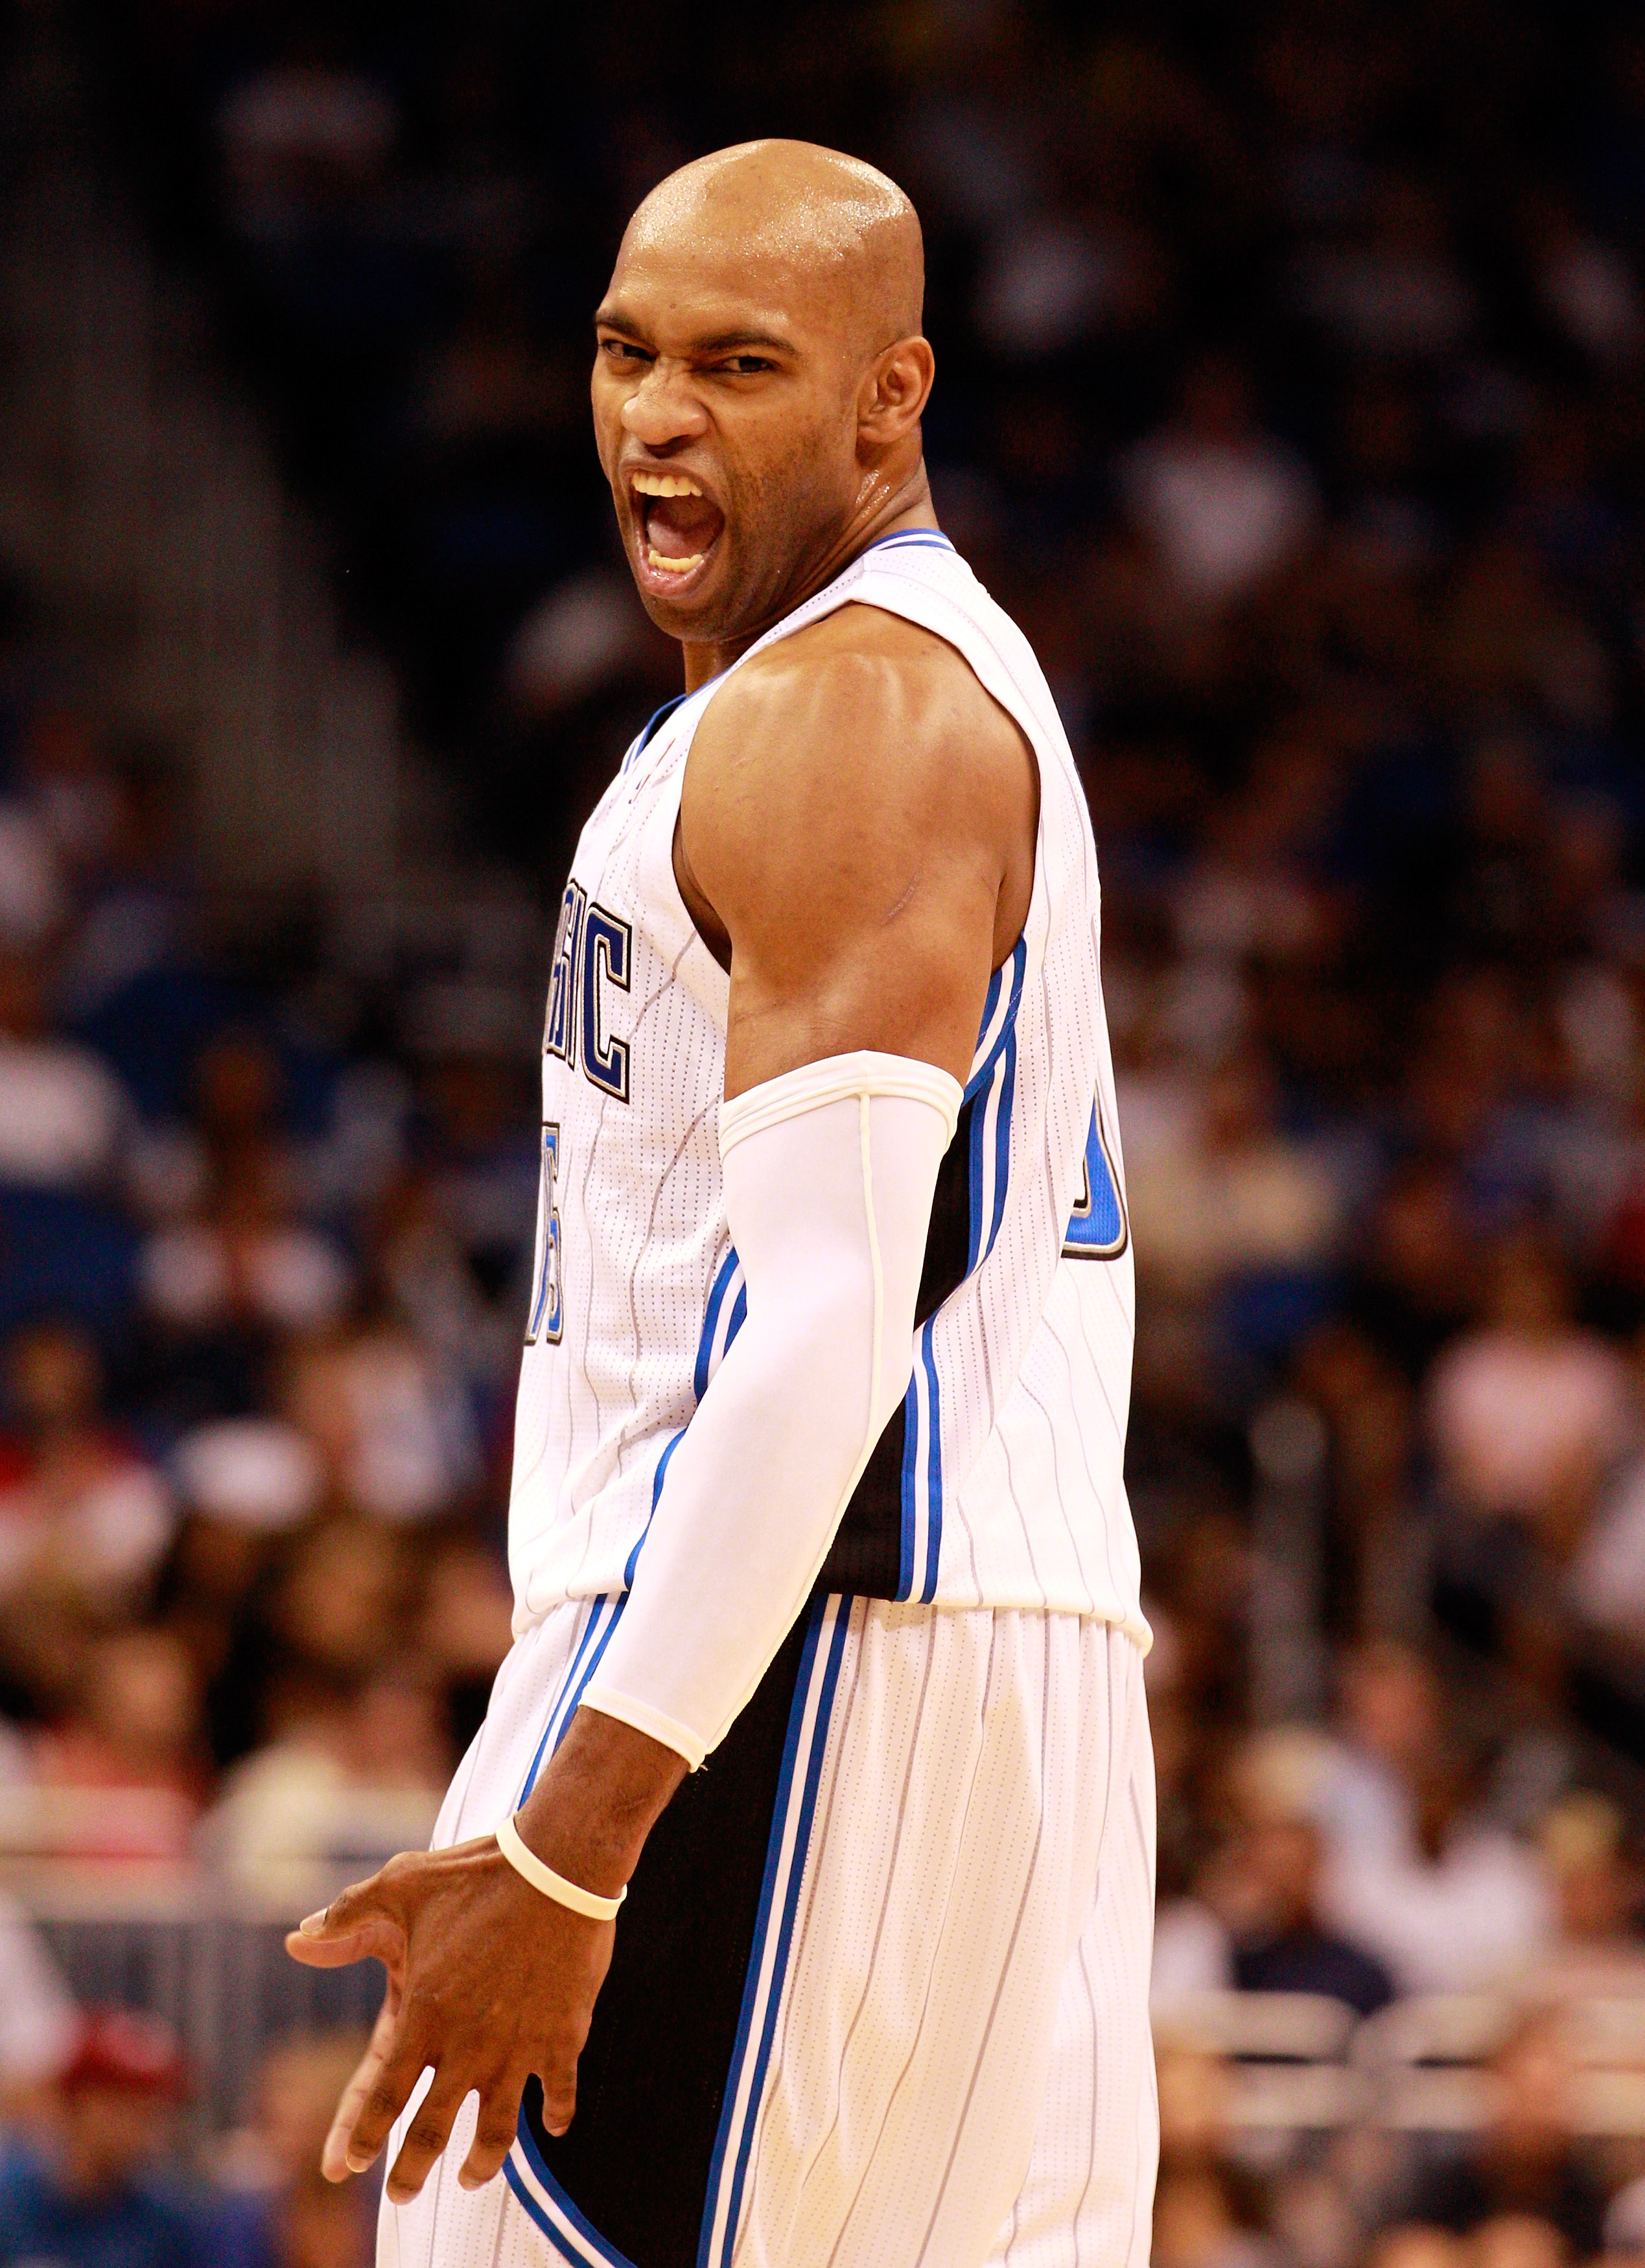 ORLANDO, FL - OCTOBER 10:  Vince Carter #15 of the Orlando Magic reacts after a basket during the game against the New Orleans Hornets at Amway Arena on October 10, 2010 in Orlando, Florida. NOTE TO USER: User expressly acknowledges and agrees that, by do